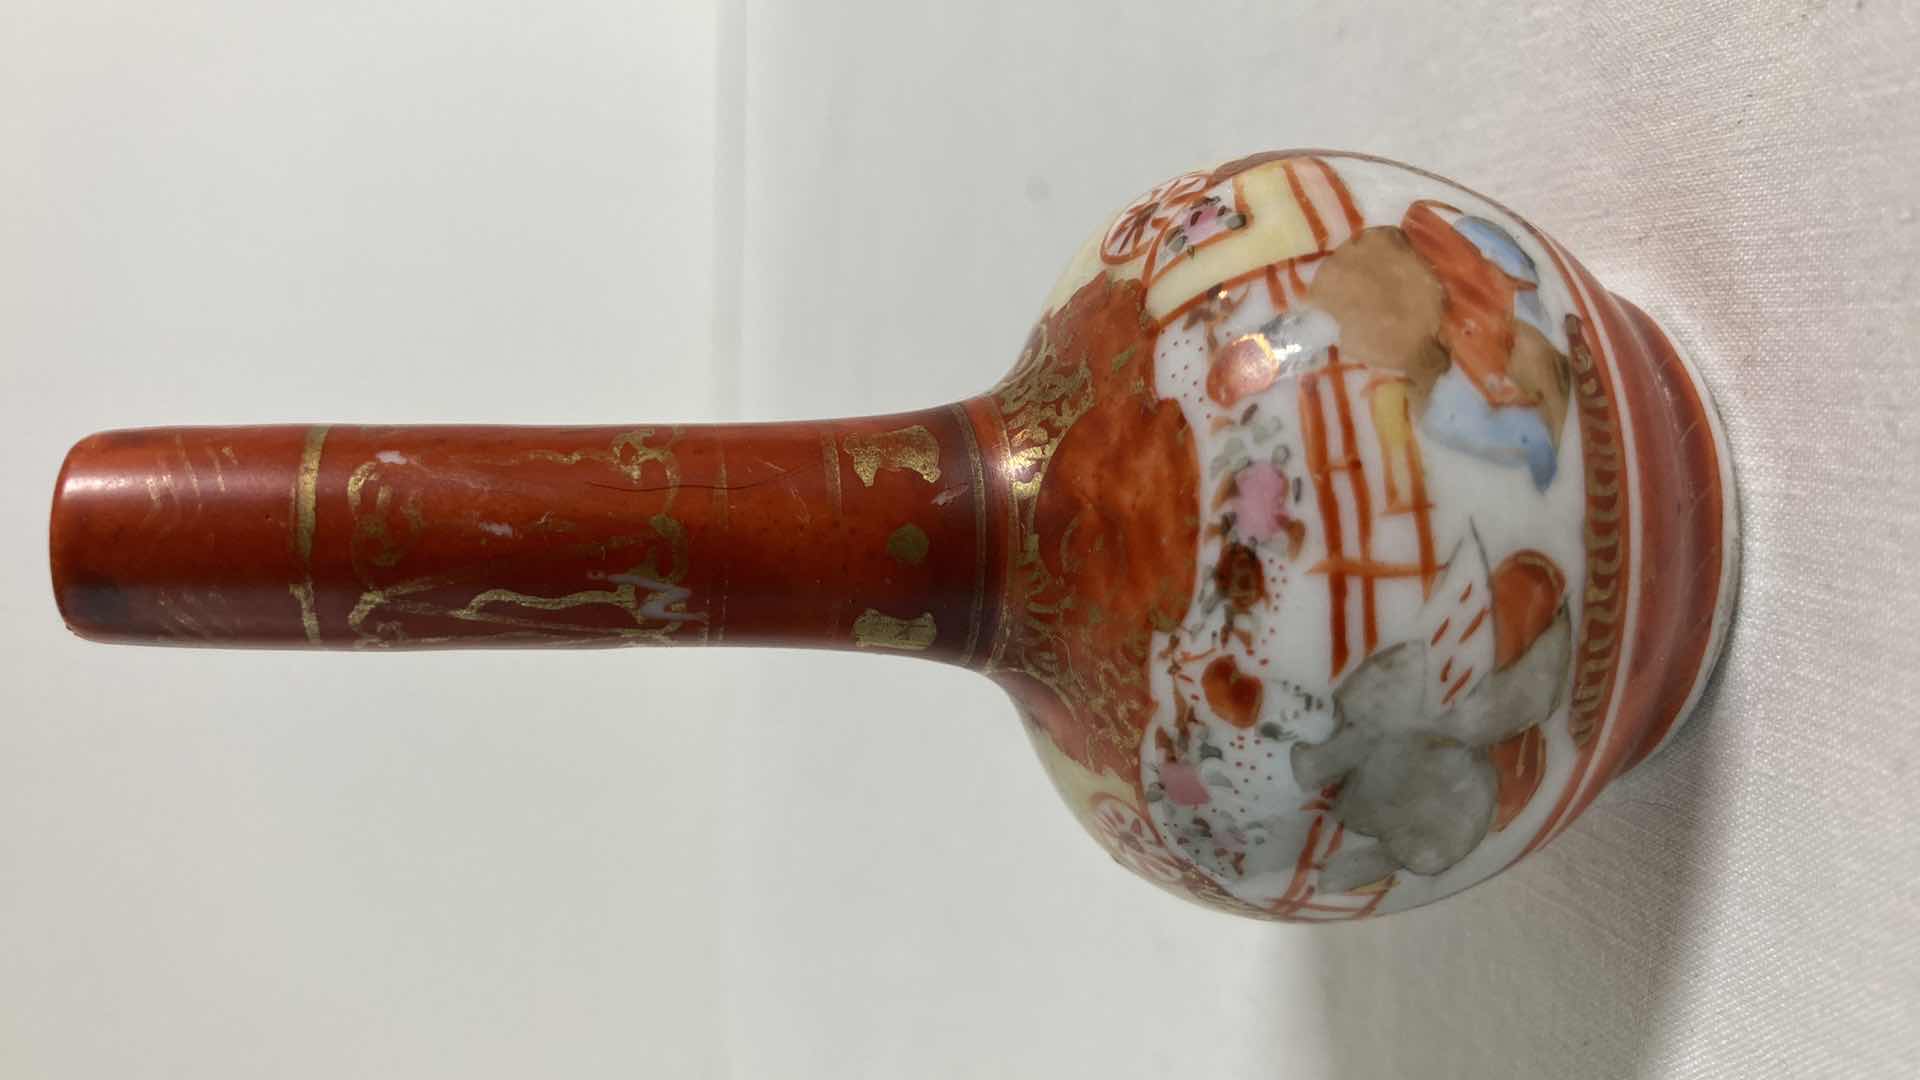 Photo 3 of EARLY CENTURY JAPANESE MINIATURE HAND PAINTED PORCELAIN VASE SIGNED BY ARTIST 1.75” X 3.5”